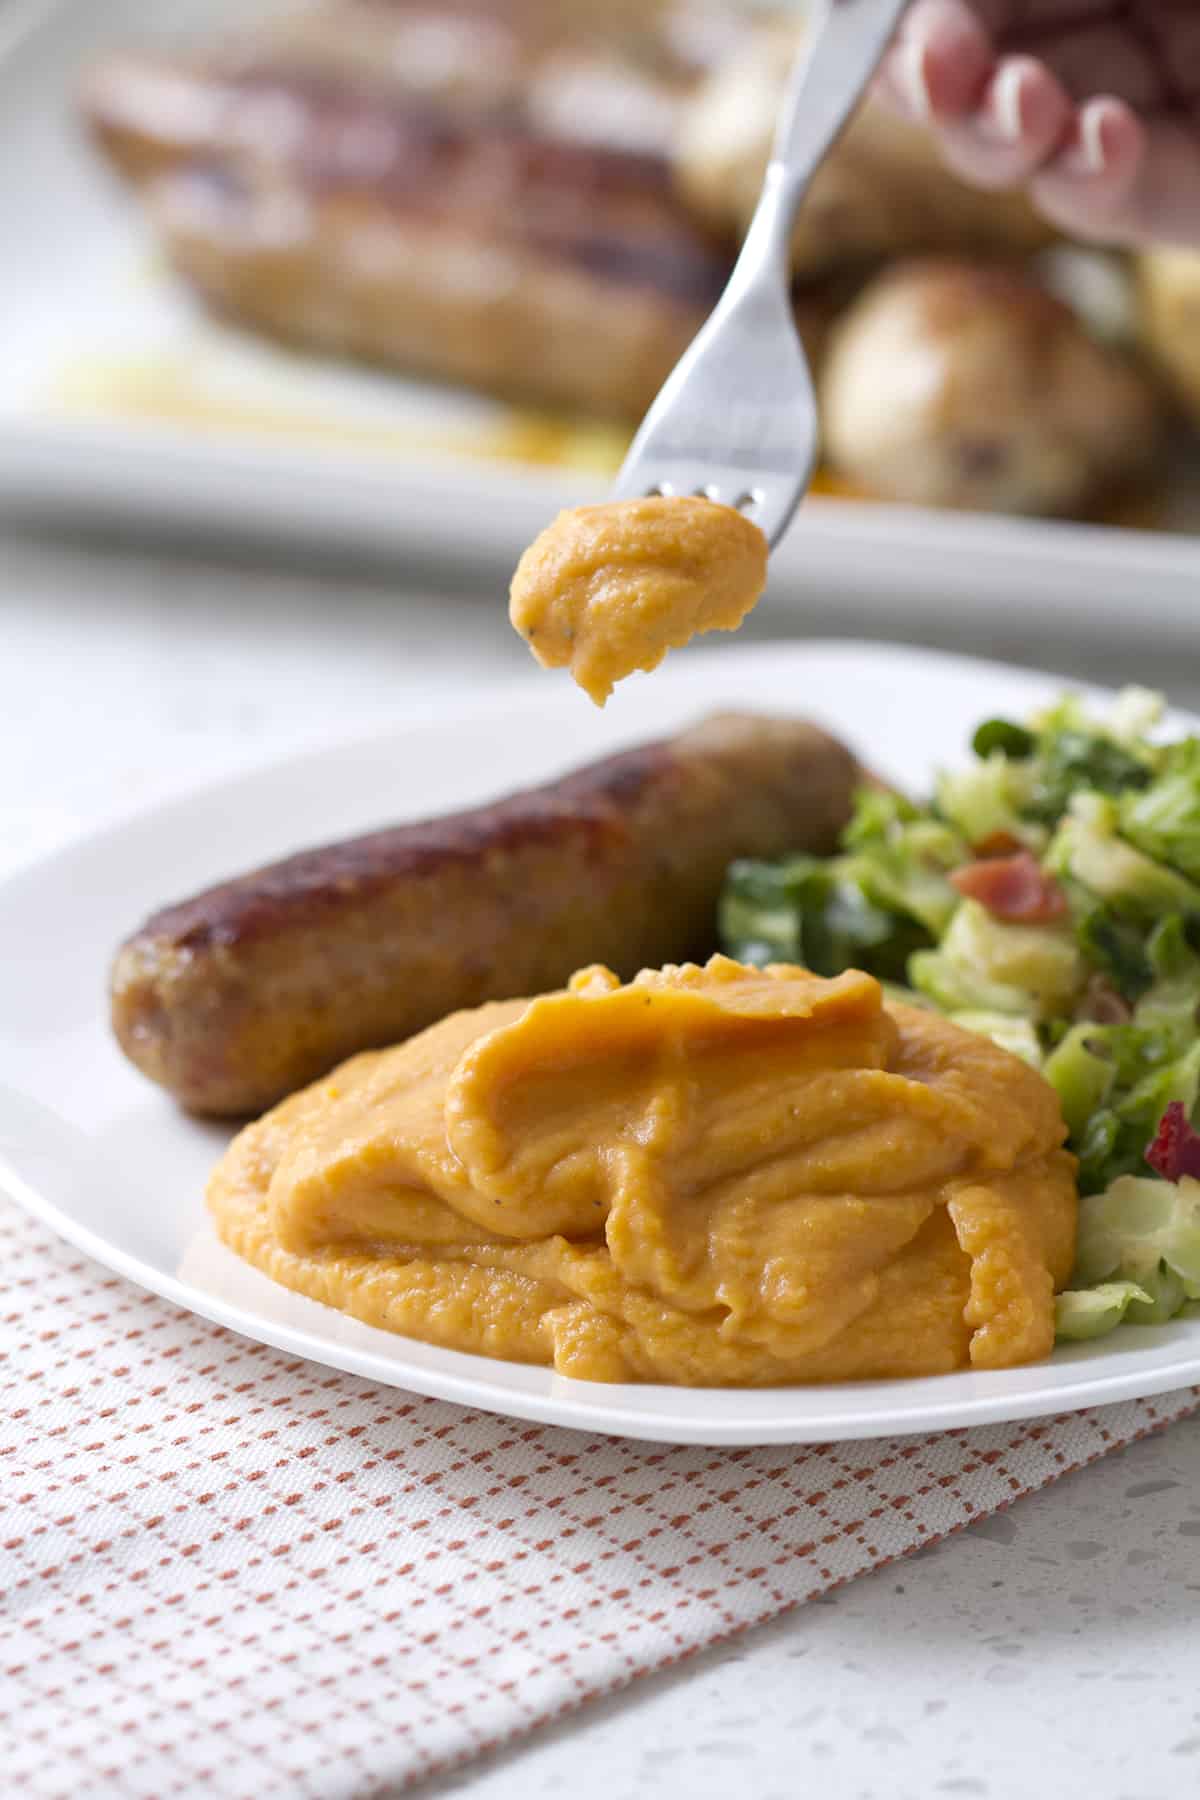 forkful on mashed sweet potatoes being held over plate